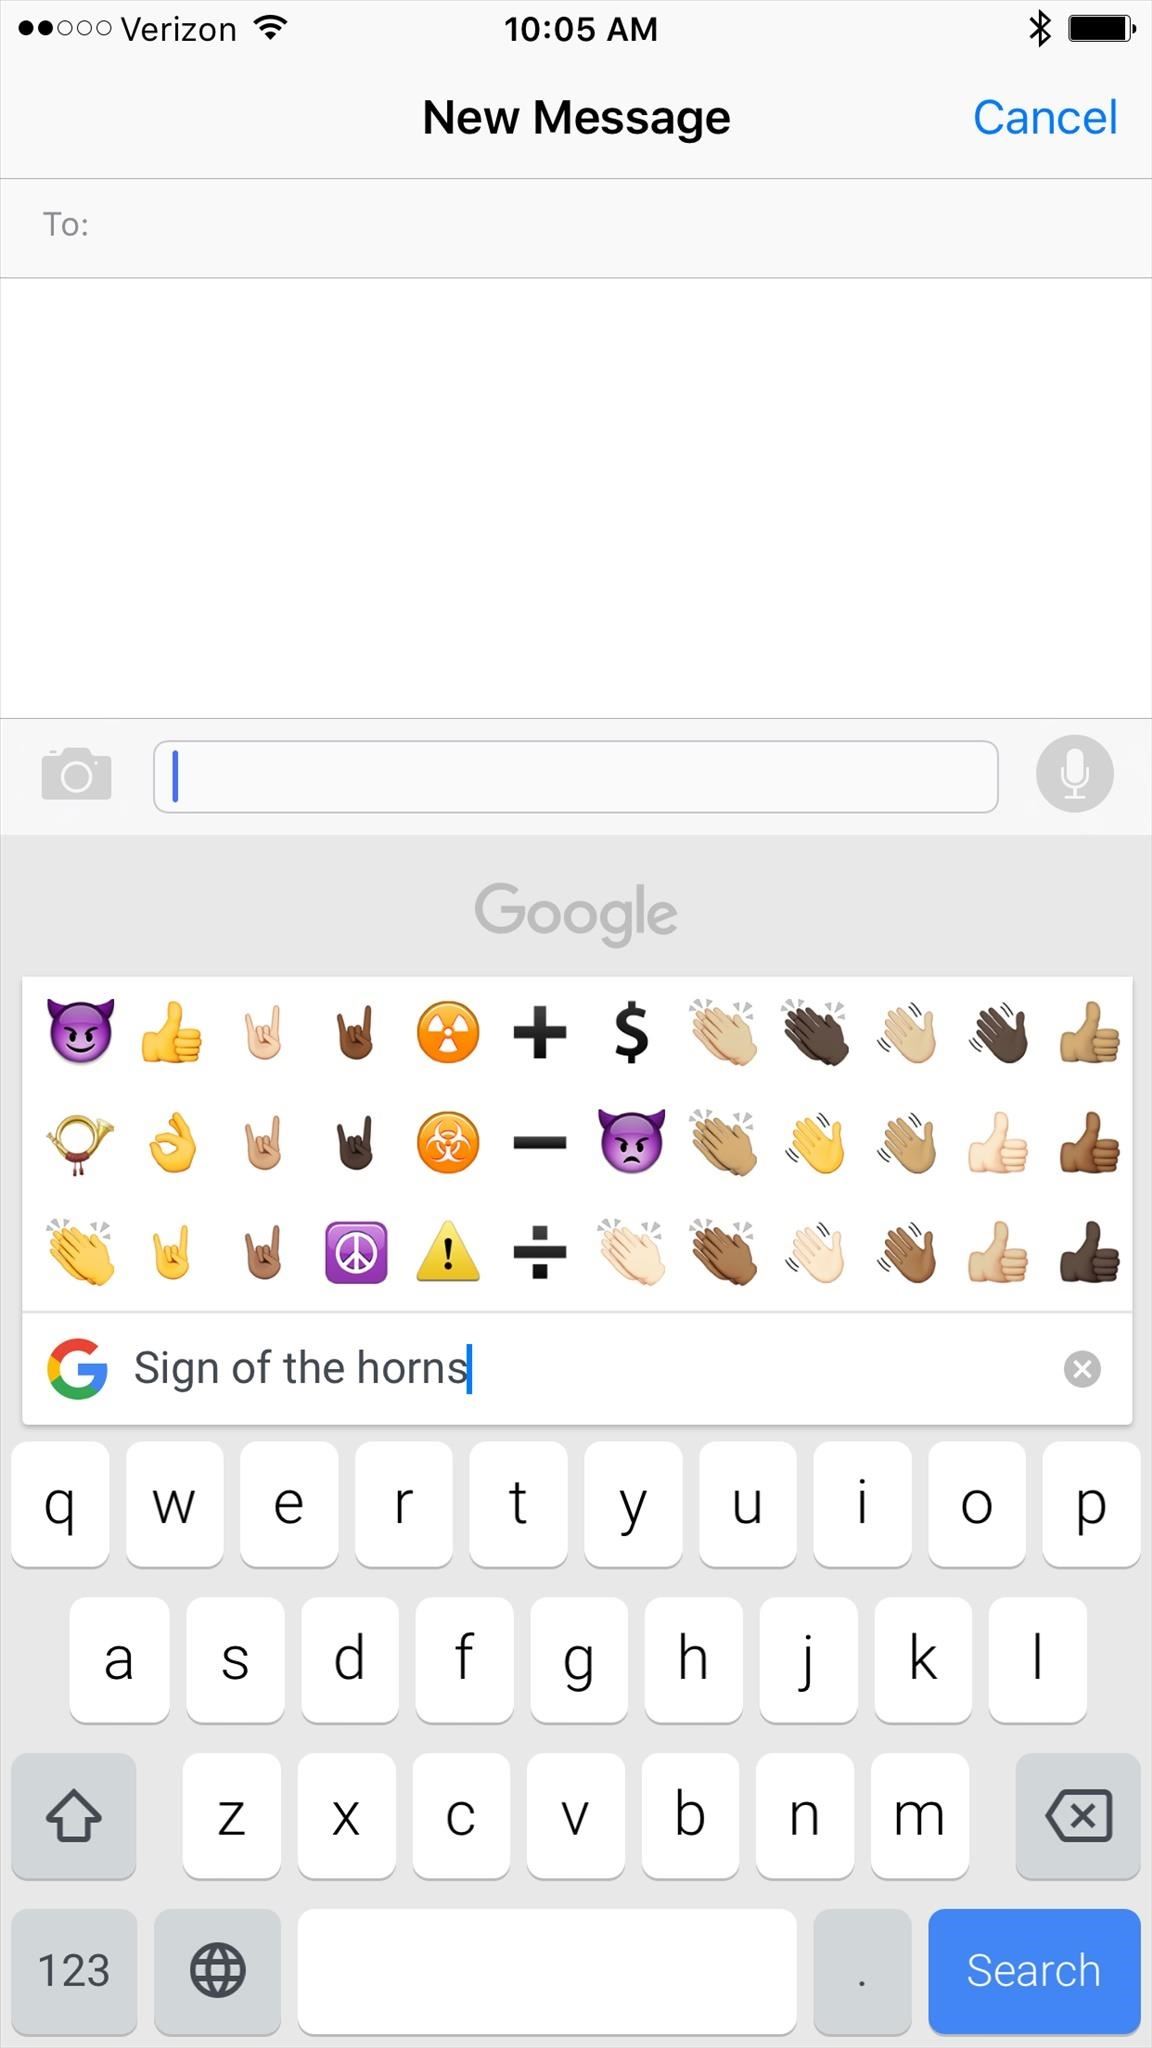 Google Just Introduced a Killer New Keyboard for iPhones